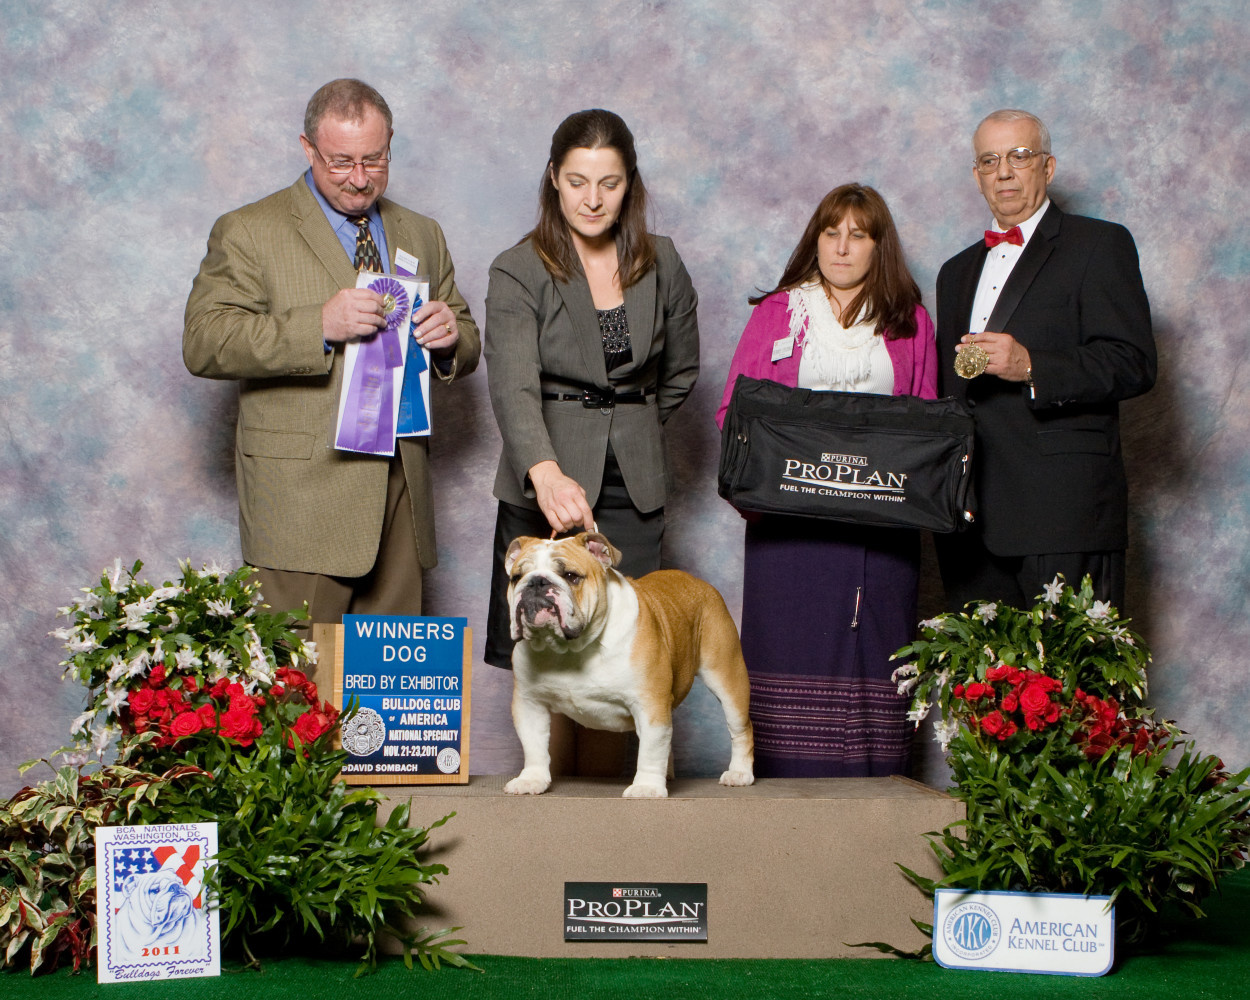 2011 National Specialty
Winners Dog/Best of Winners
Best In Sweepstakes
Breeder Judge Mr. Dennis Ehntholt
Entry of 109 males, 250 total class animals